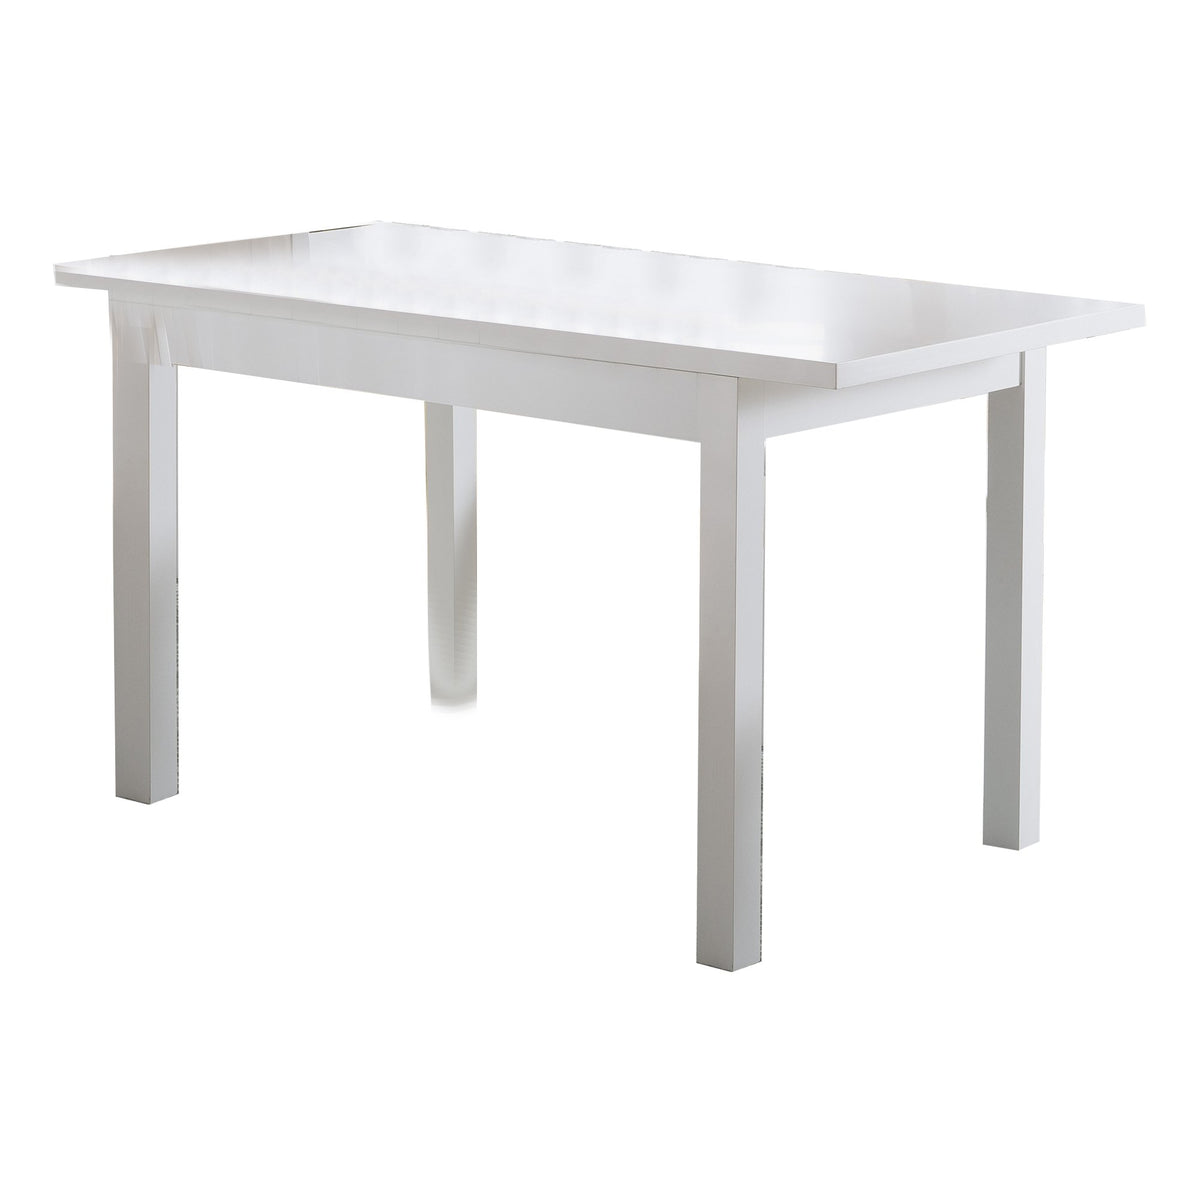 Rectangular Wooden Frame Dining Table with Straight Legs, Glossy White - BM214728